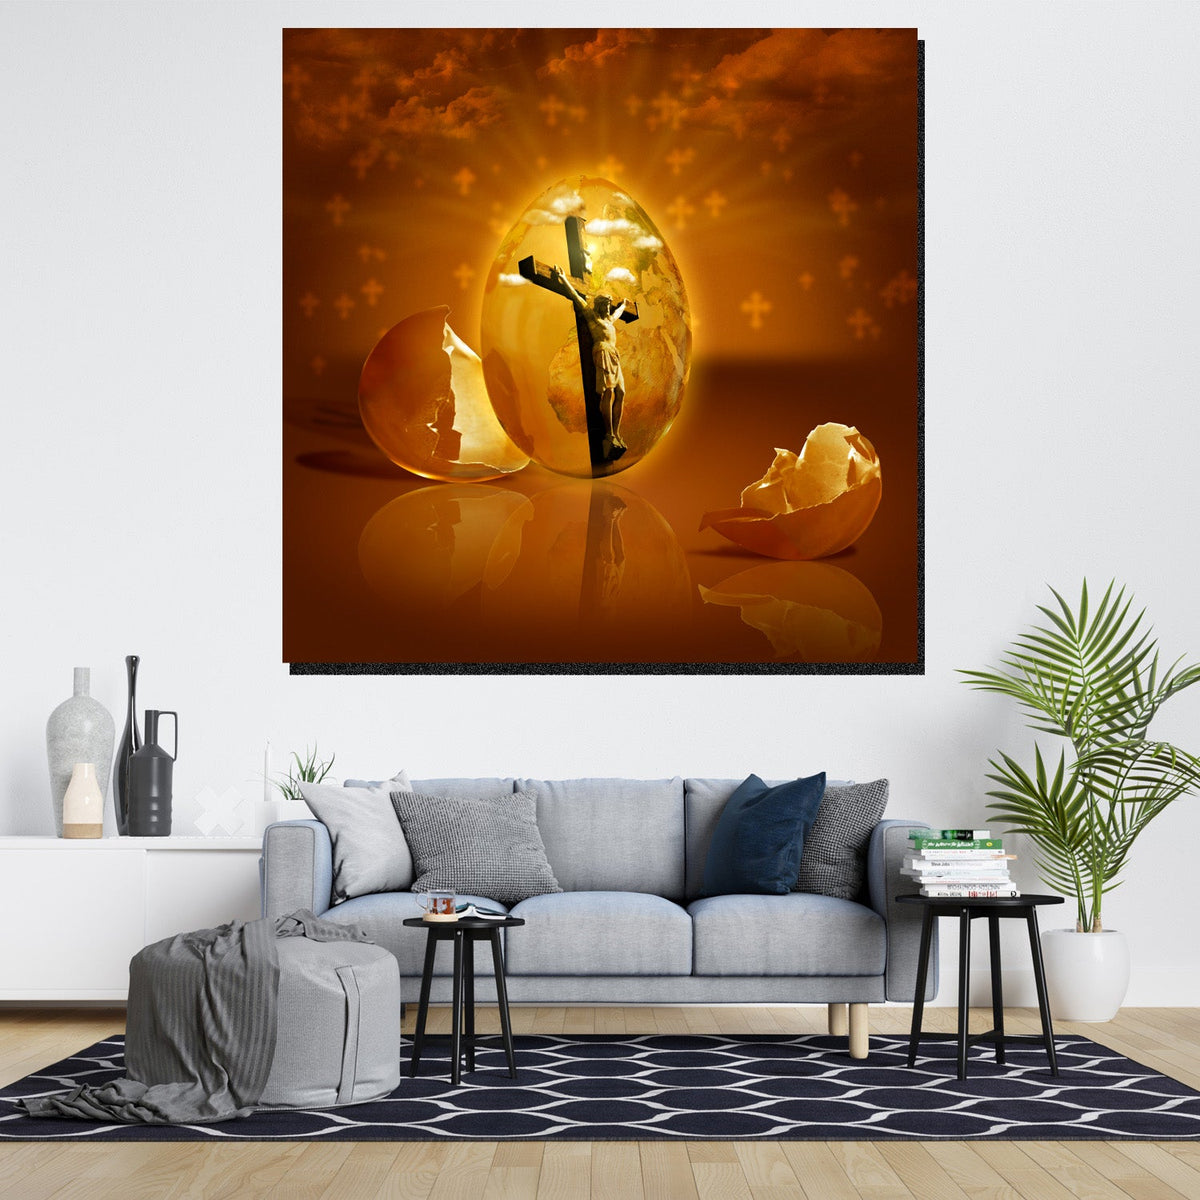 https://cdn.shopify.com/s/files/1/0387/9986/8044/products/JesusRoseOnEasterCanvasArtprintStretched-1.jpg